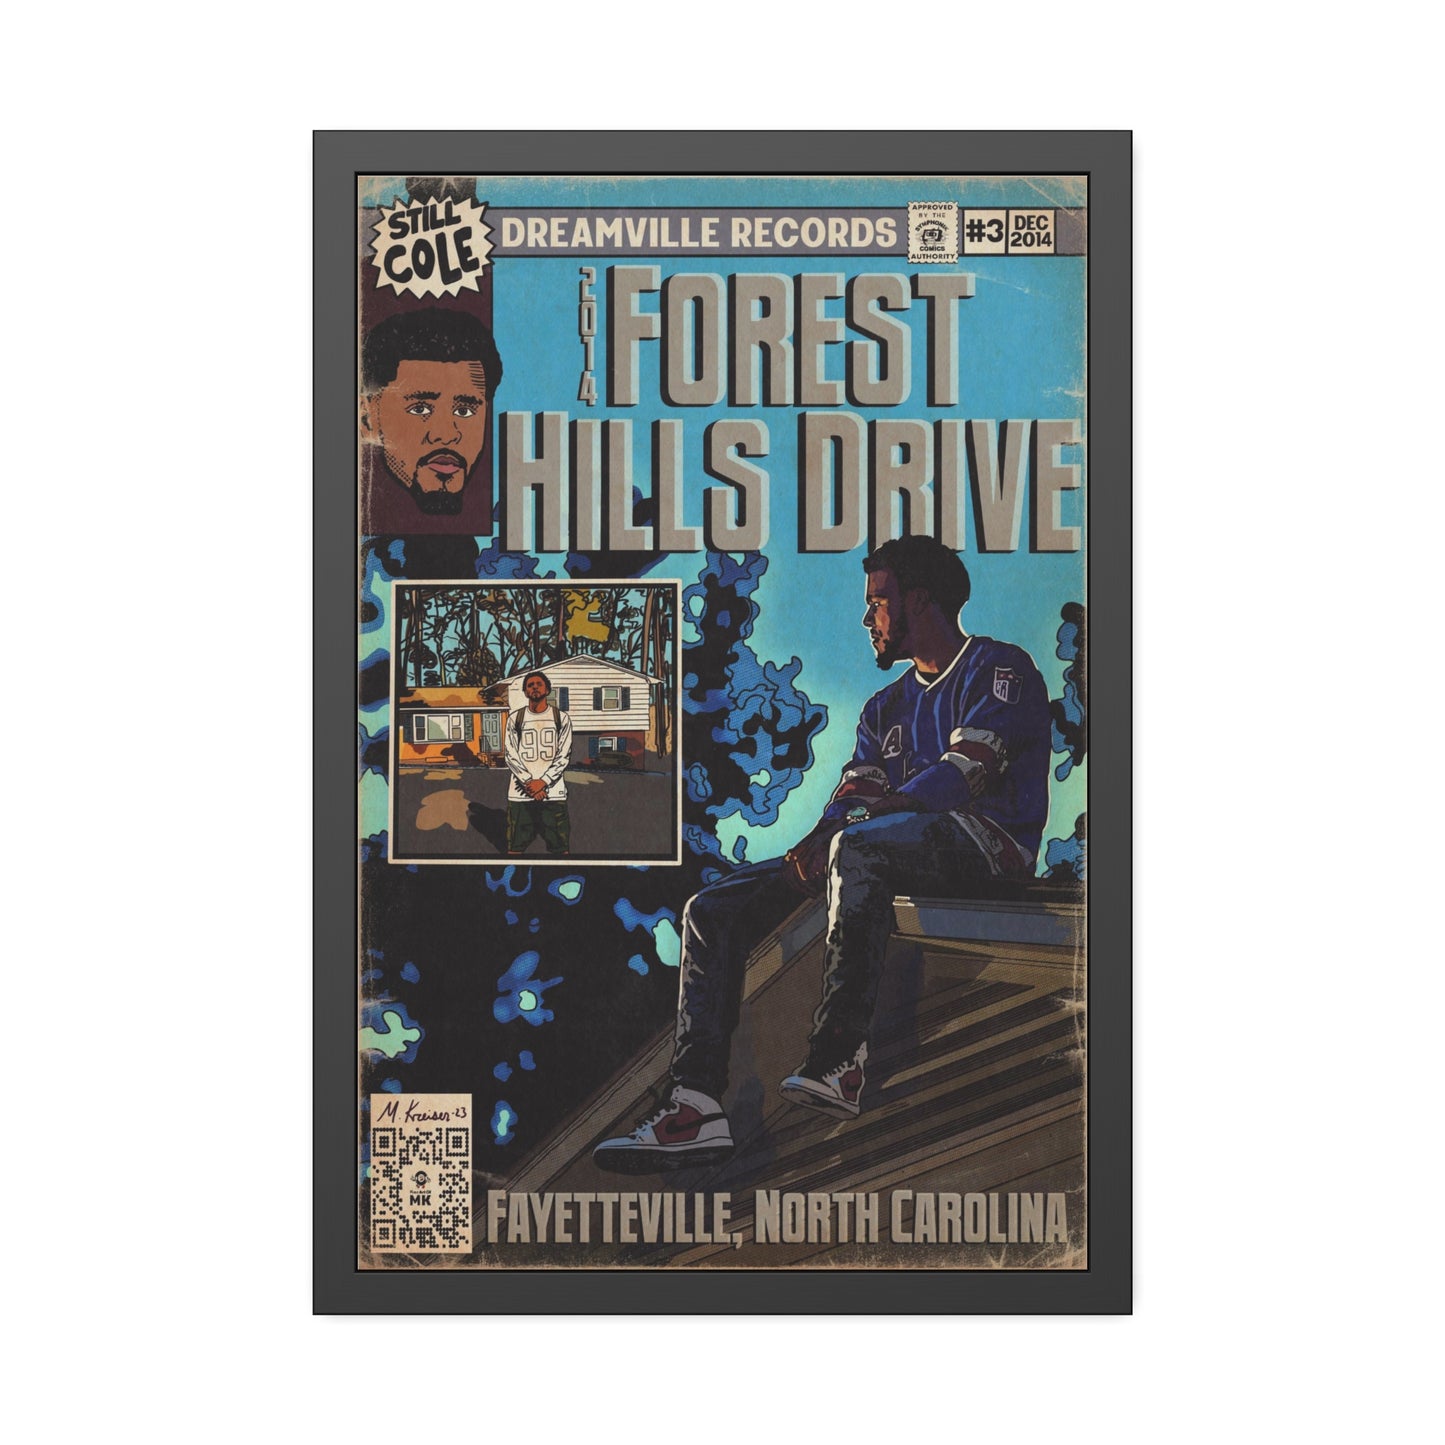 J Cole - 2014 Forest Hills Drive - Framed Paper Posters